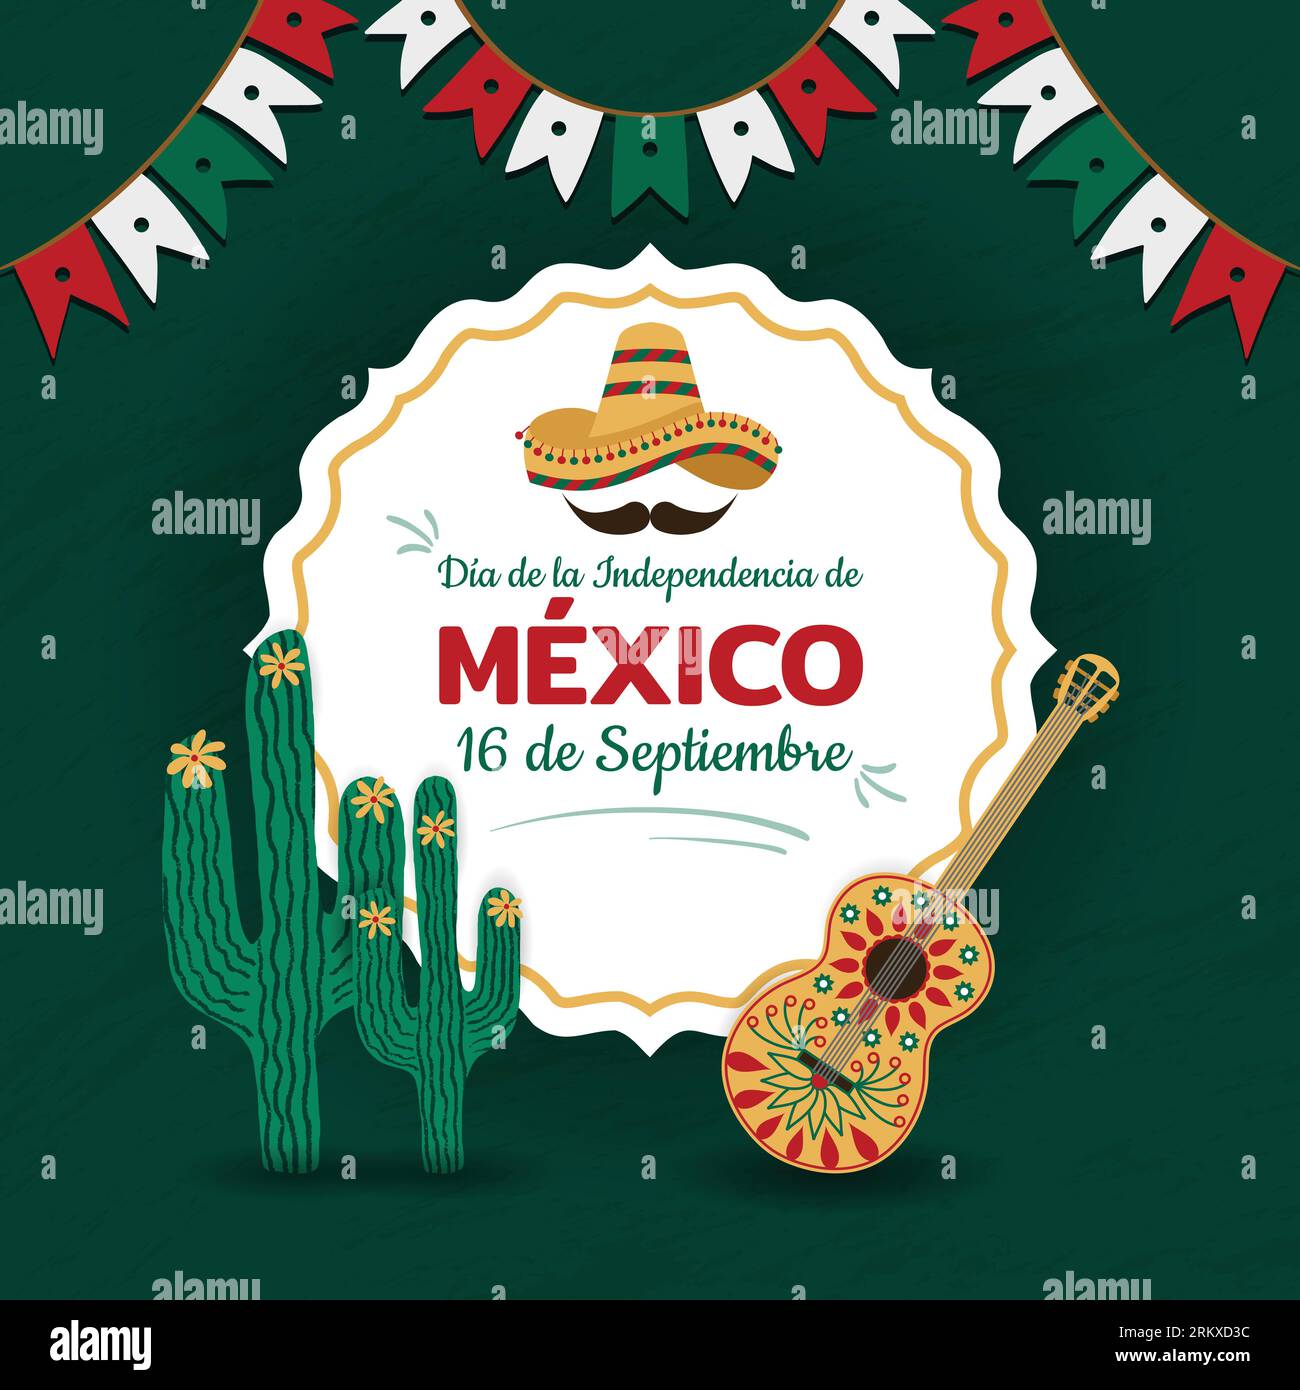 Mexico Independence Day Poster September 16 Celebration Vector Illustration. Mexican Flag Decoration, Cactus, Guitar and Sombrero Hat. Social media po Stock Vector